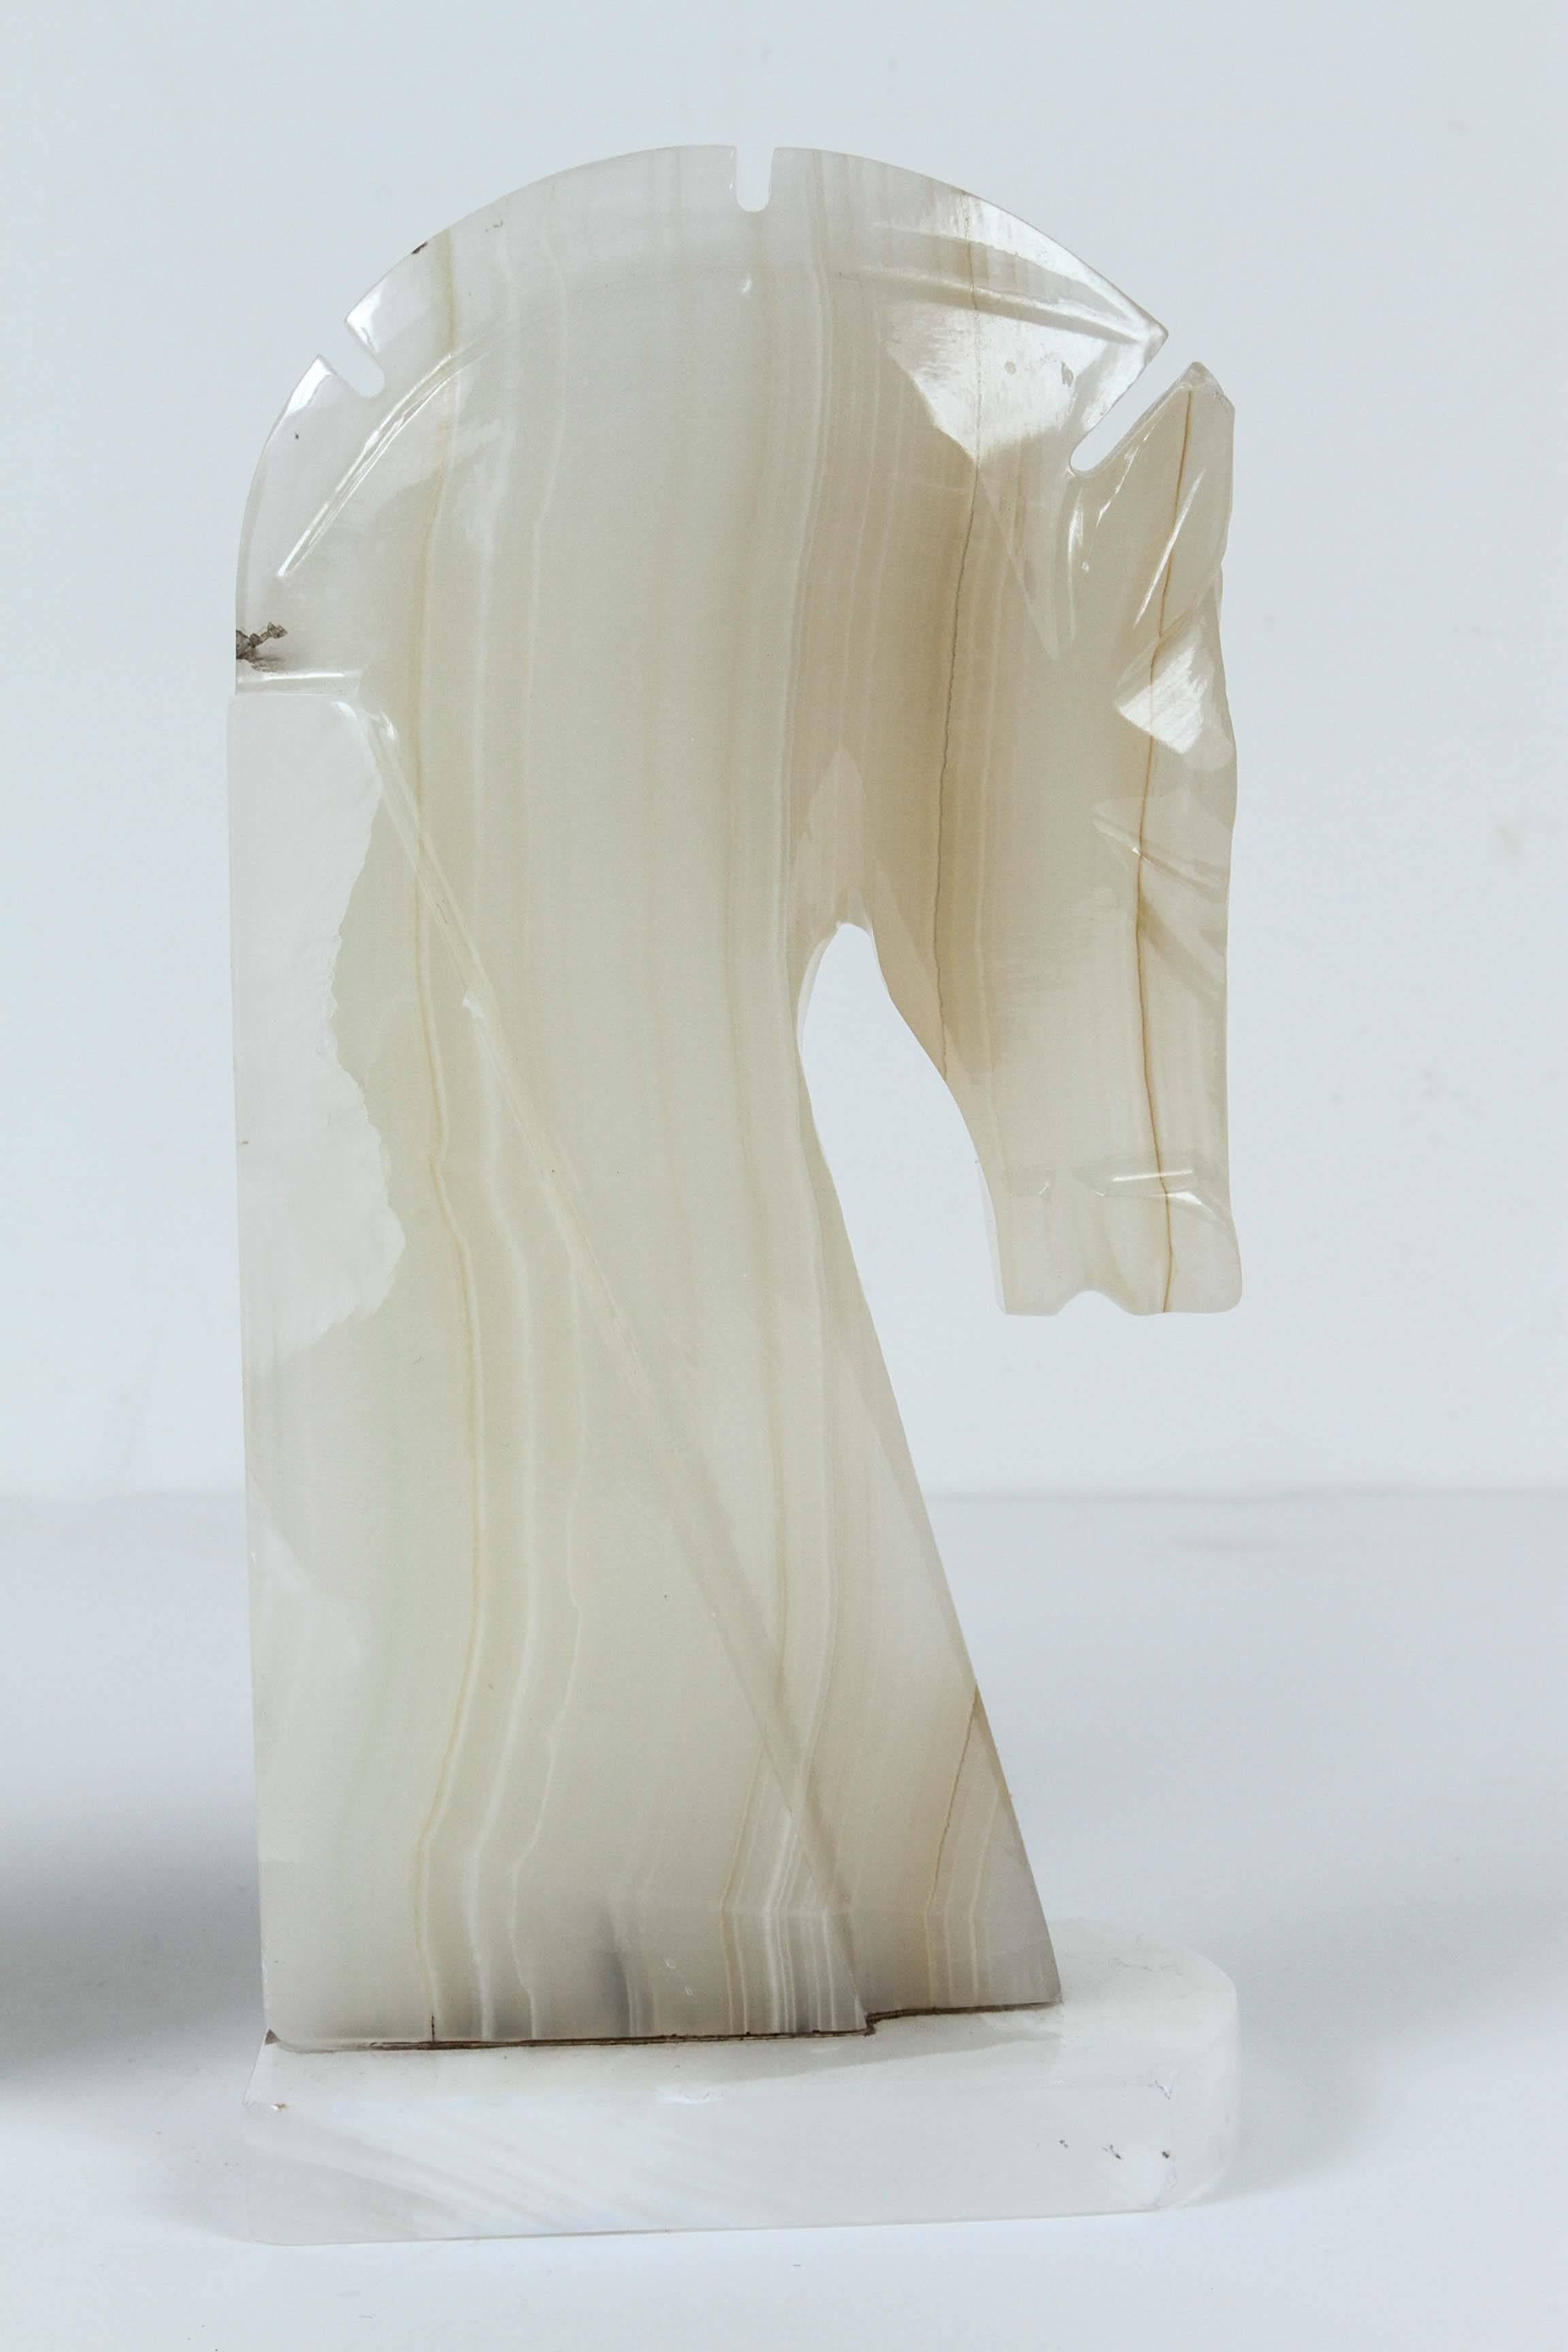 Marble Pair of Art Deco Style Horses Bookends